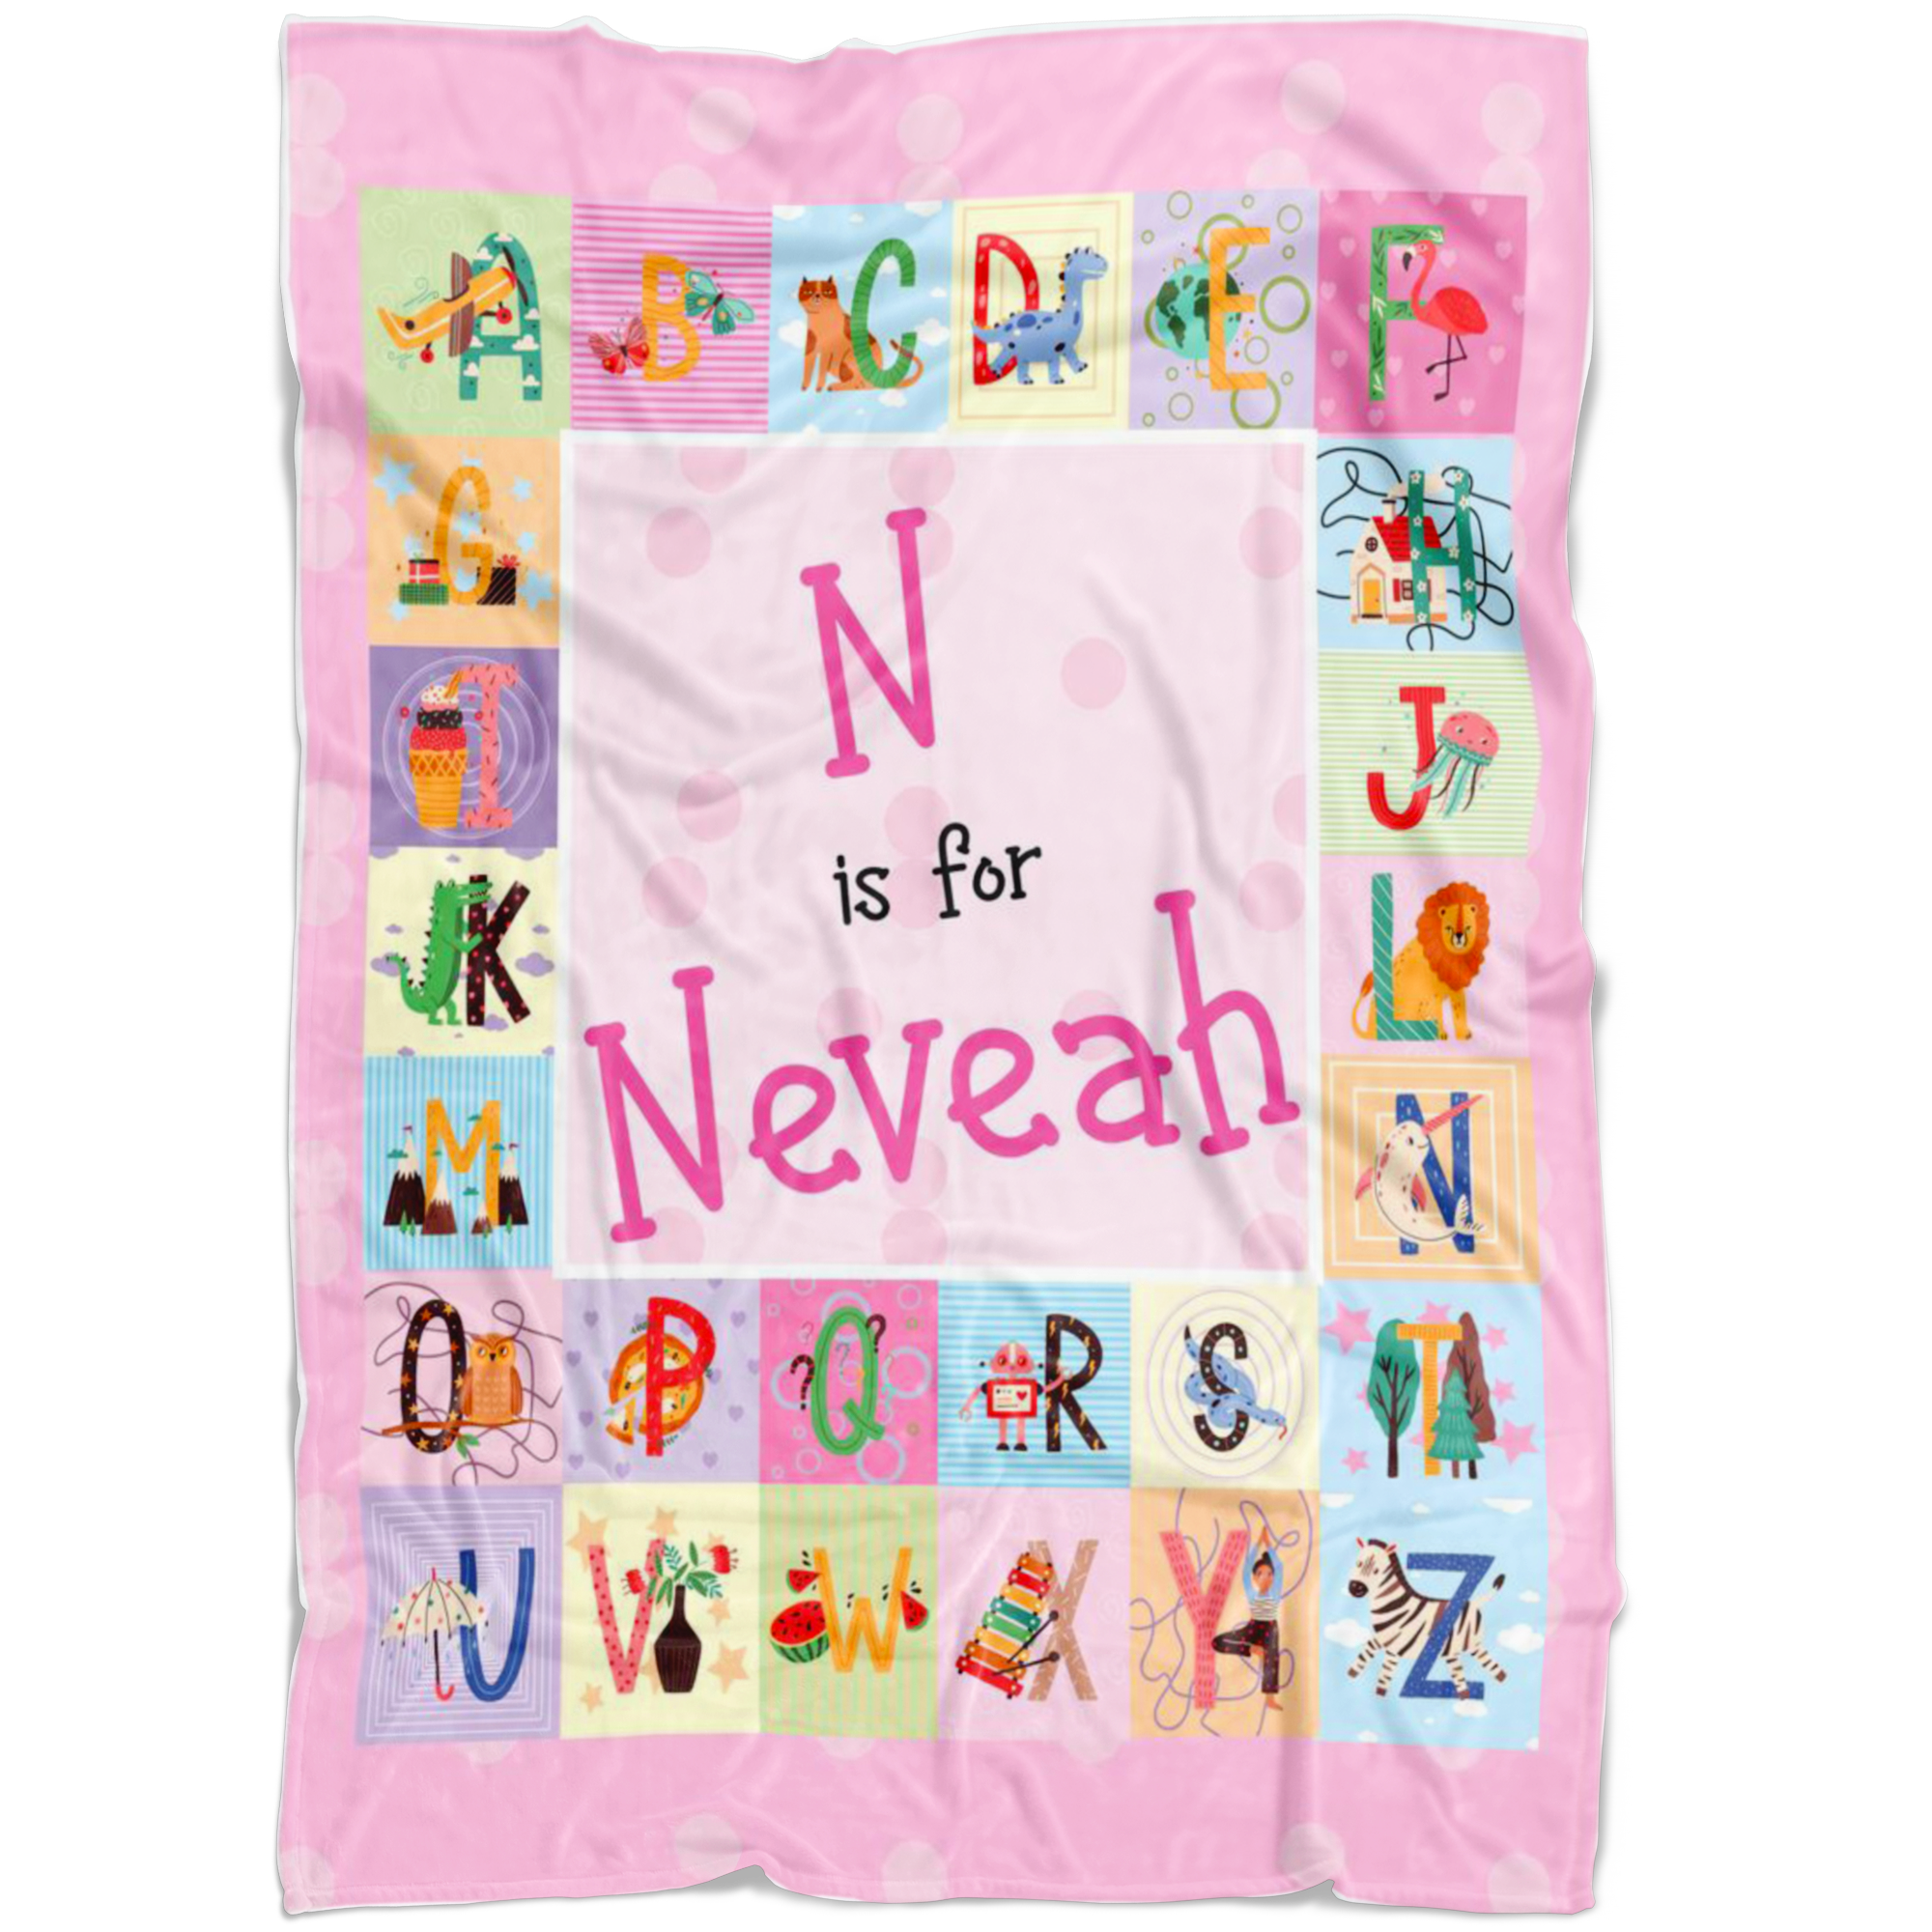 Personalized Name ABC Blanket for Babies & Girls - Neveah